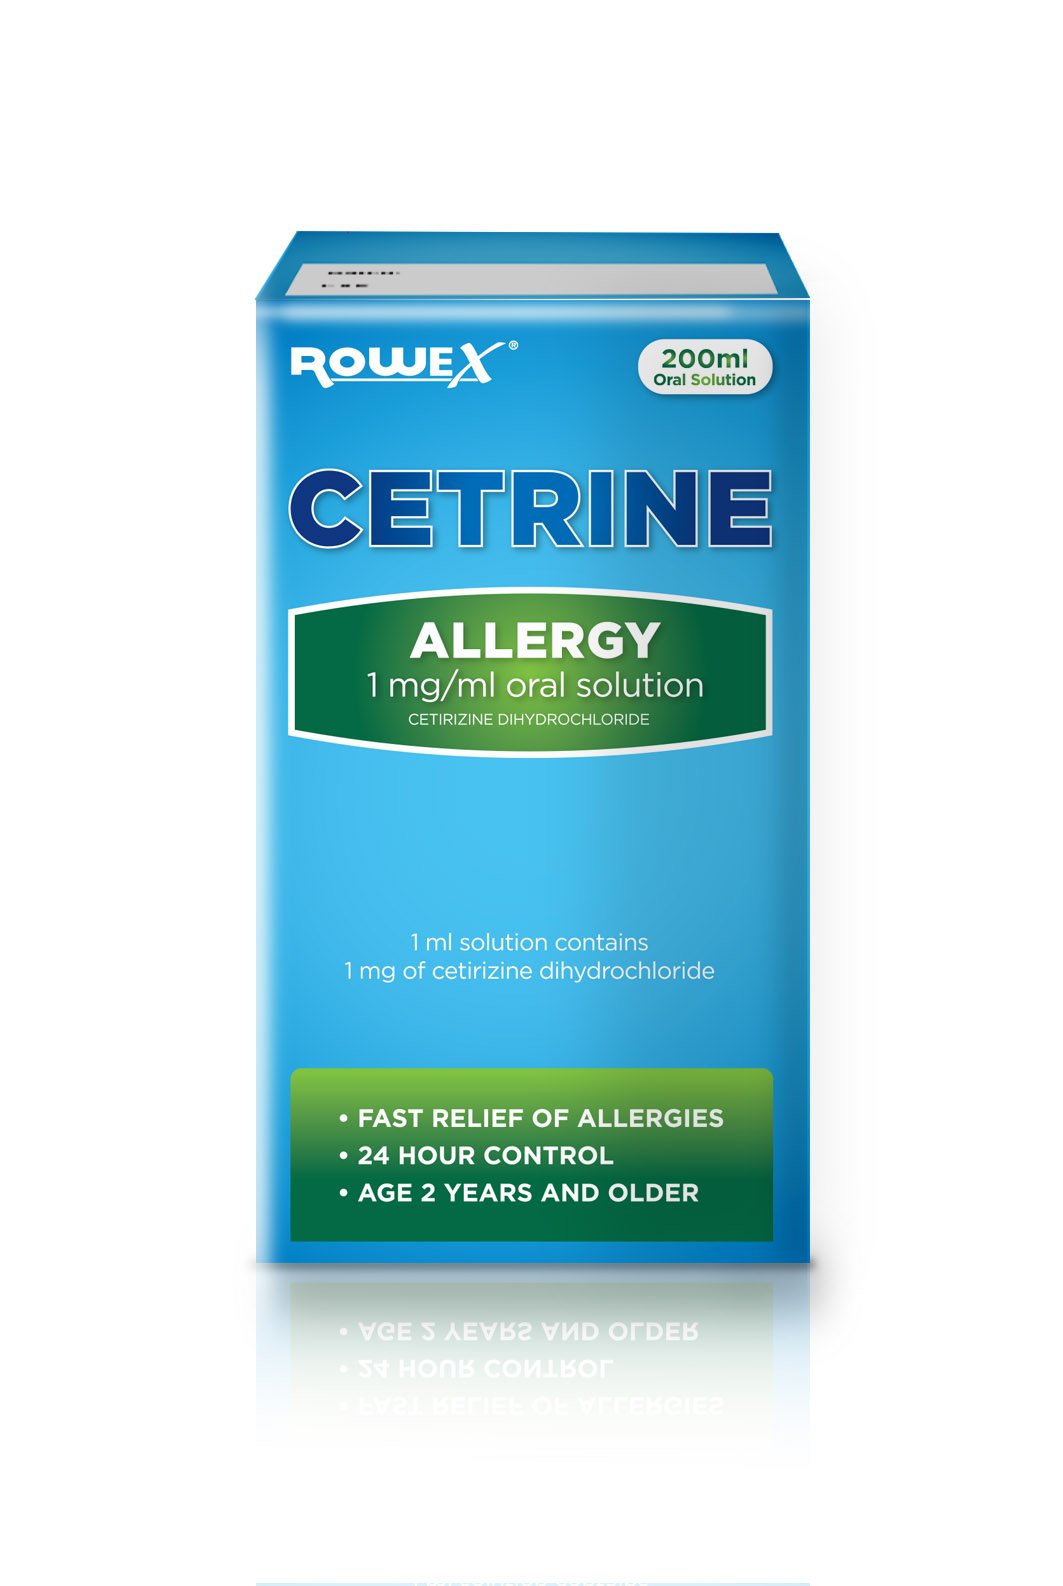 Cetrine Allergy 1mg Allergy Relief Oral Solution